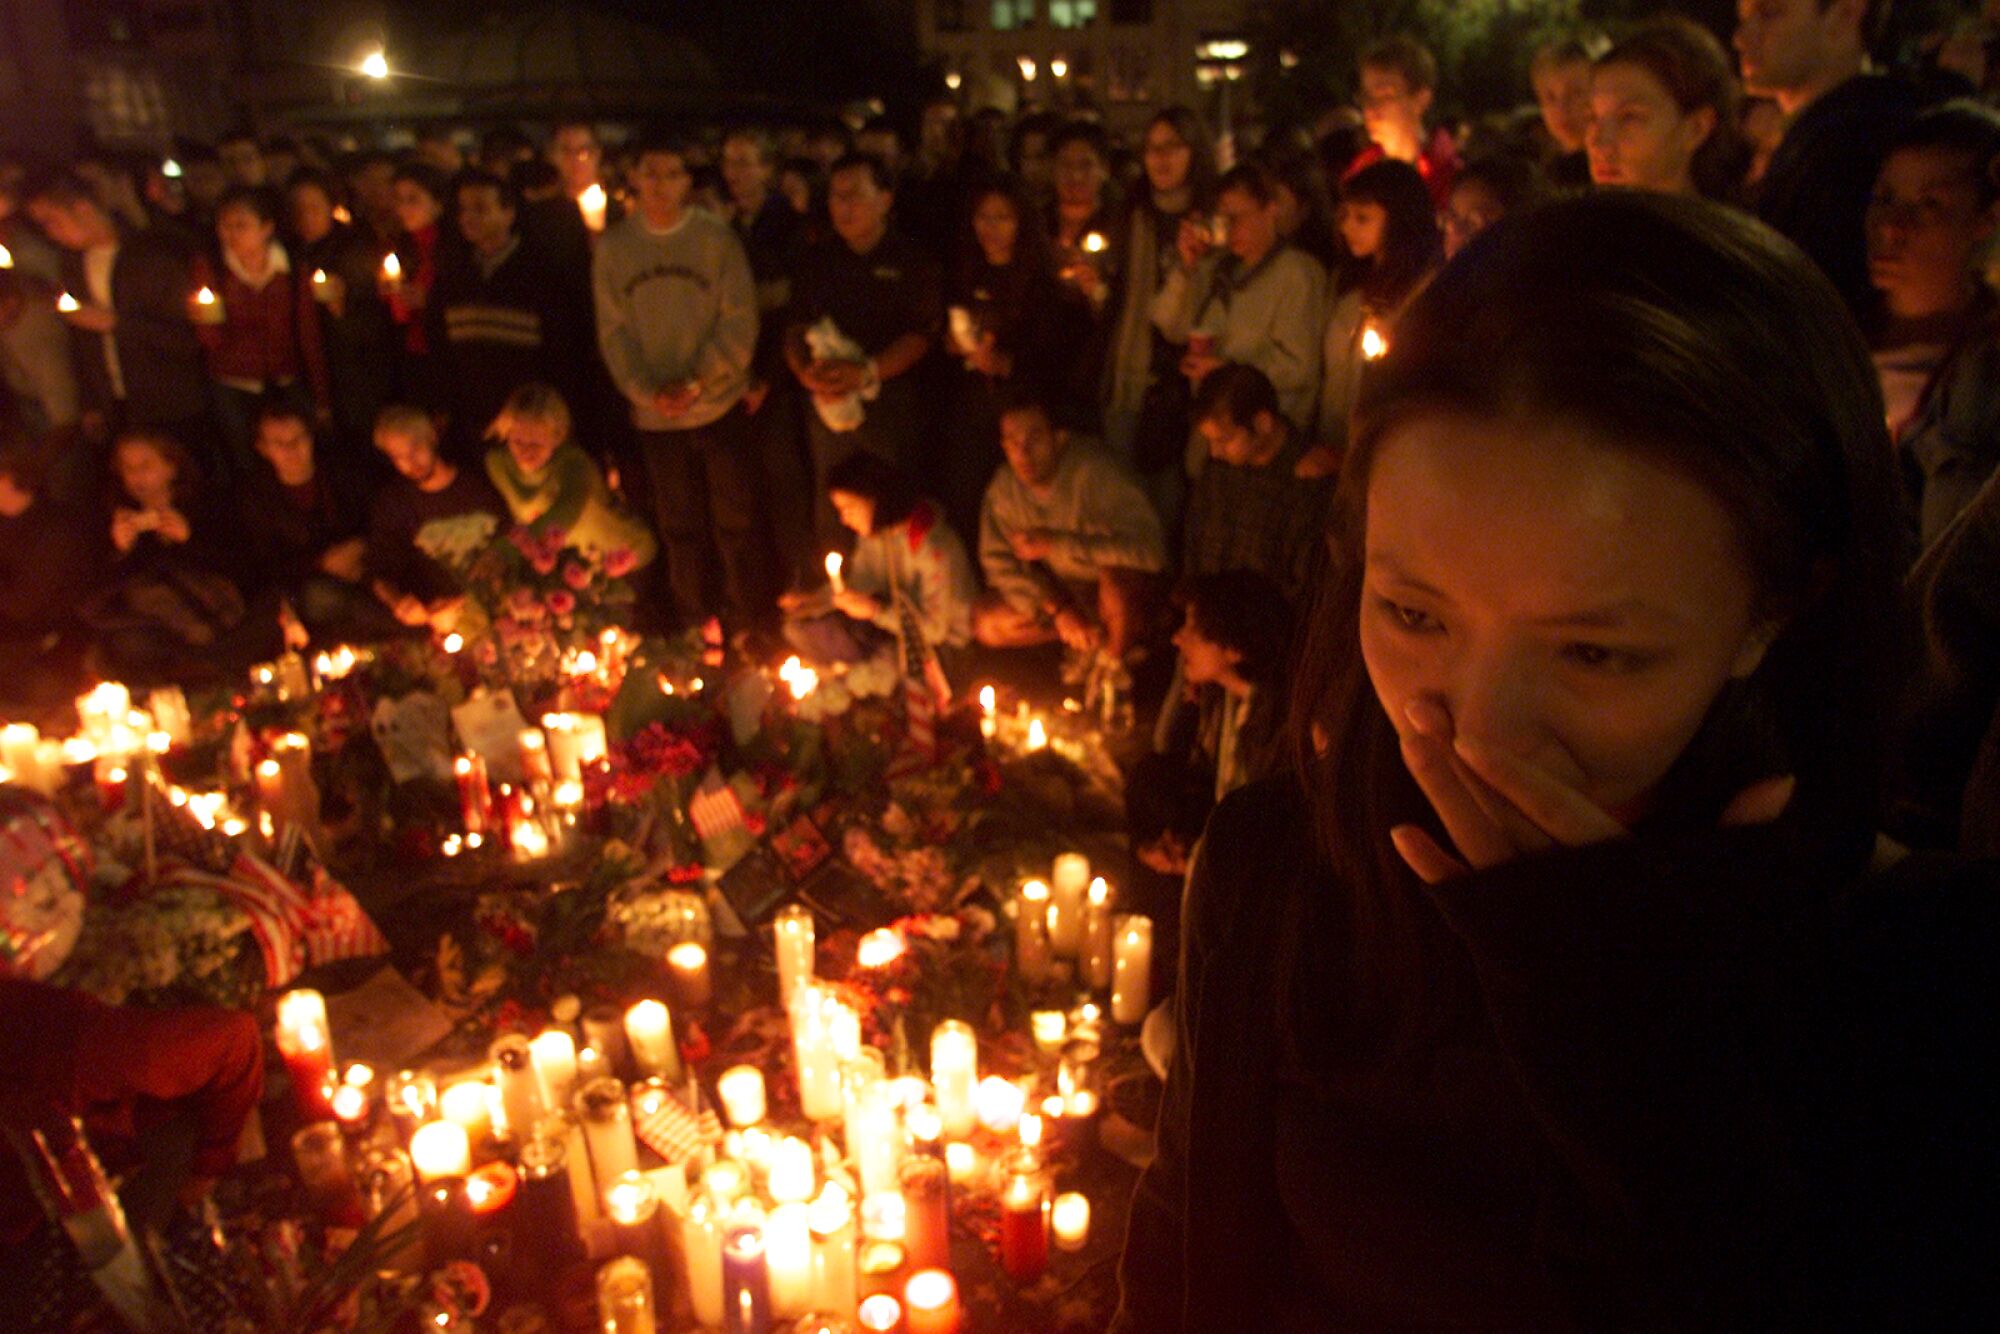 A woman, left foreground, stands among a group encircling candles and flowers